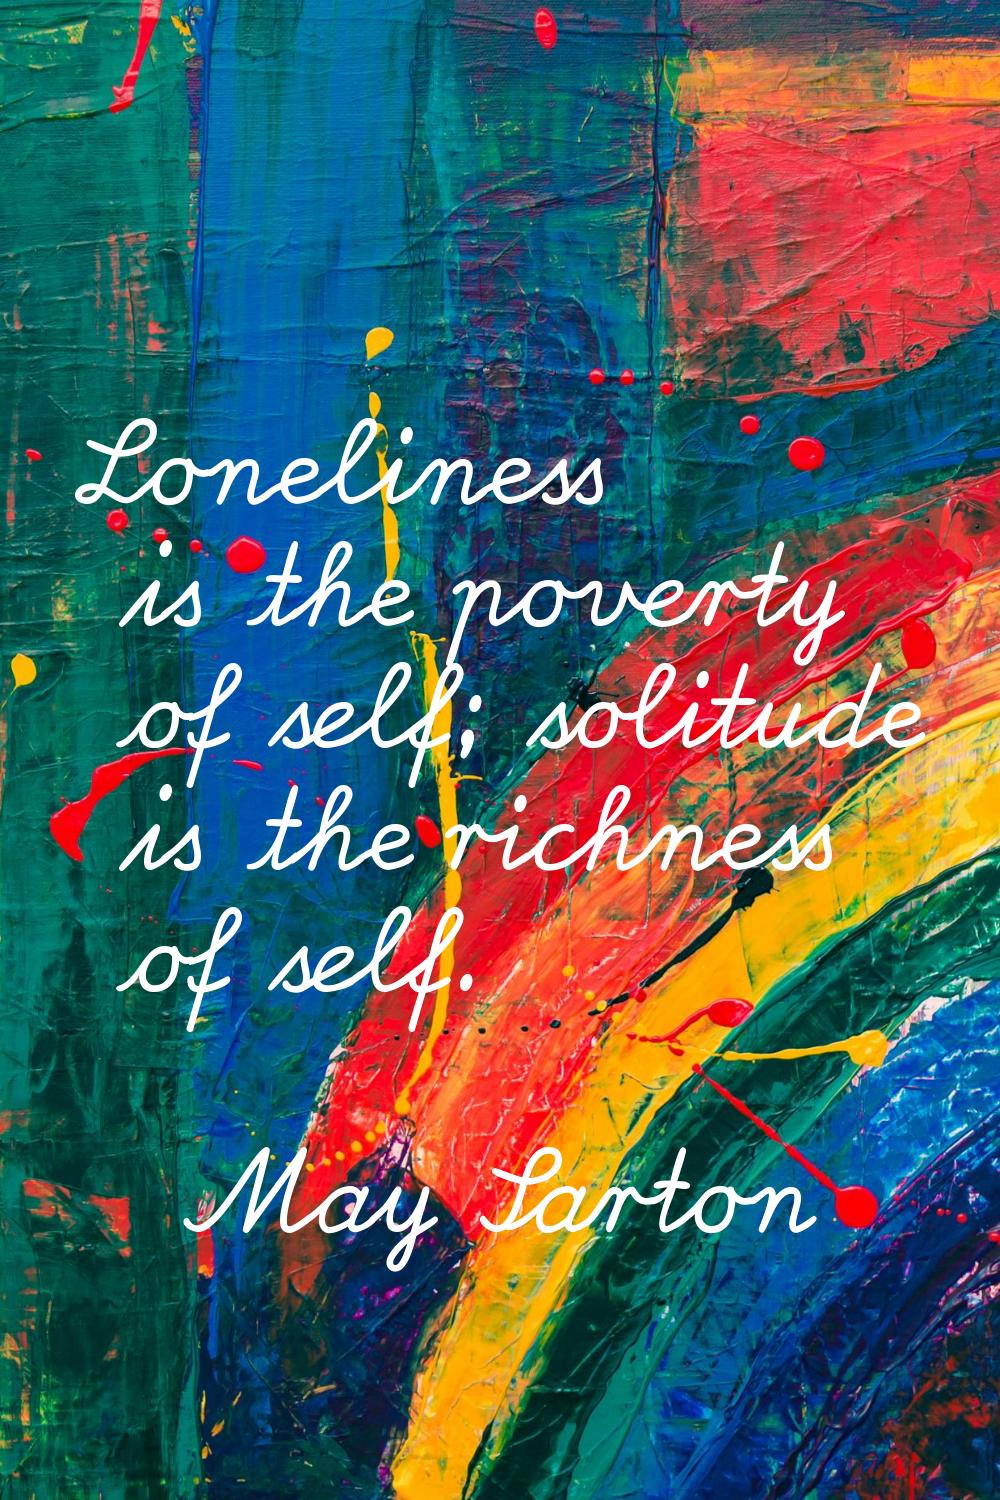 Loneliness is the poverty of self; solitude is the richness of self.